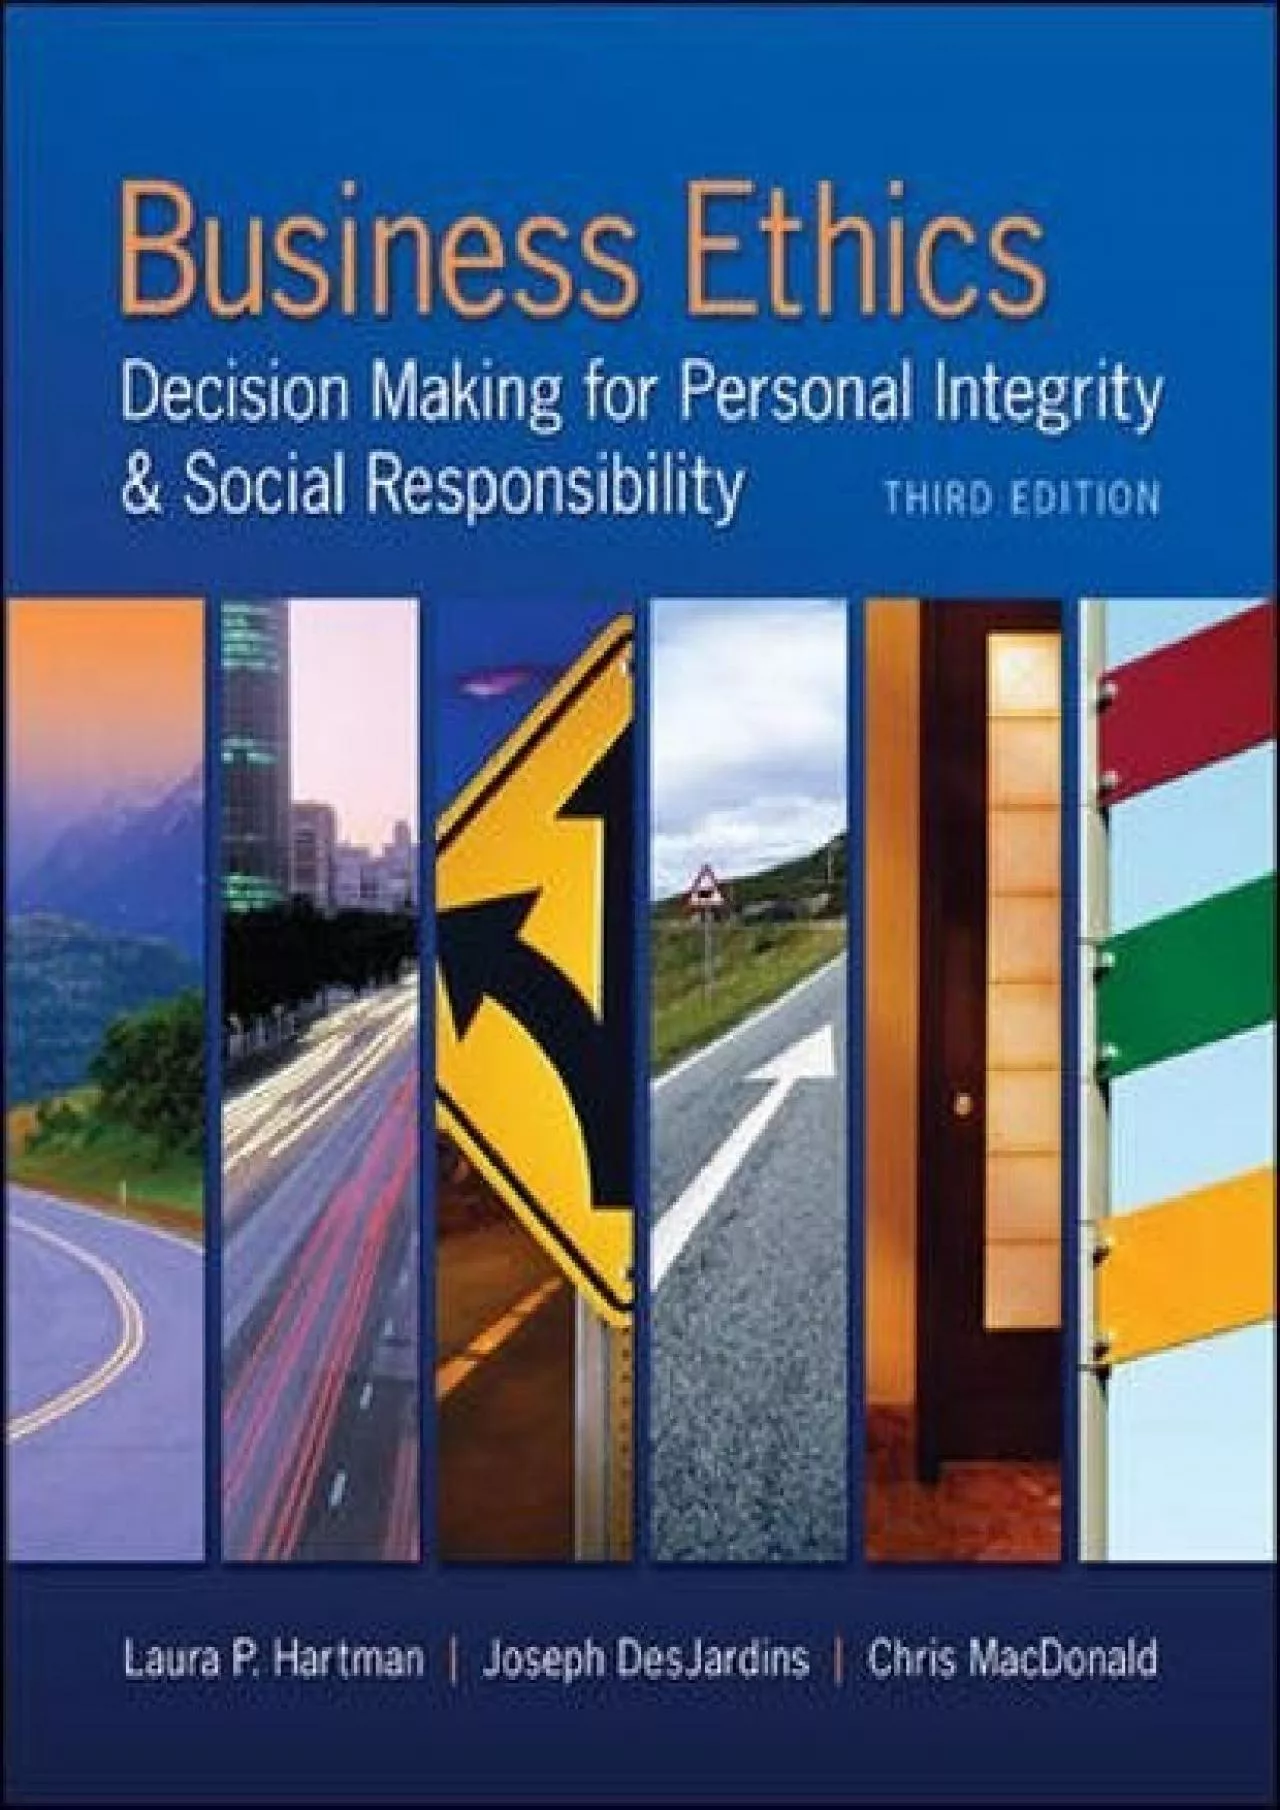 (BOOK)-Business Ethics: Decision Making for Personal Integrity & Social Responsibility